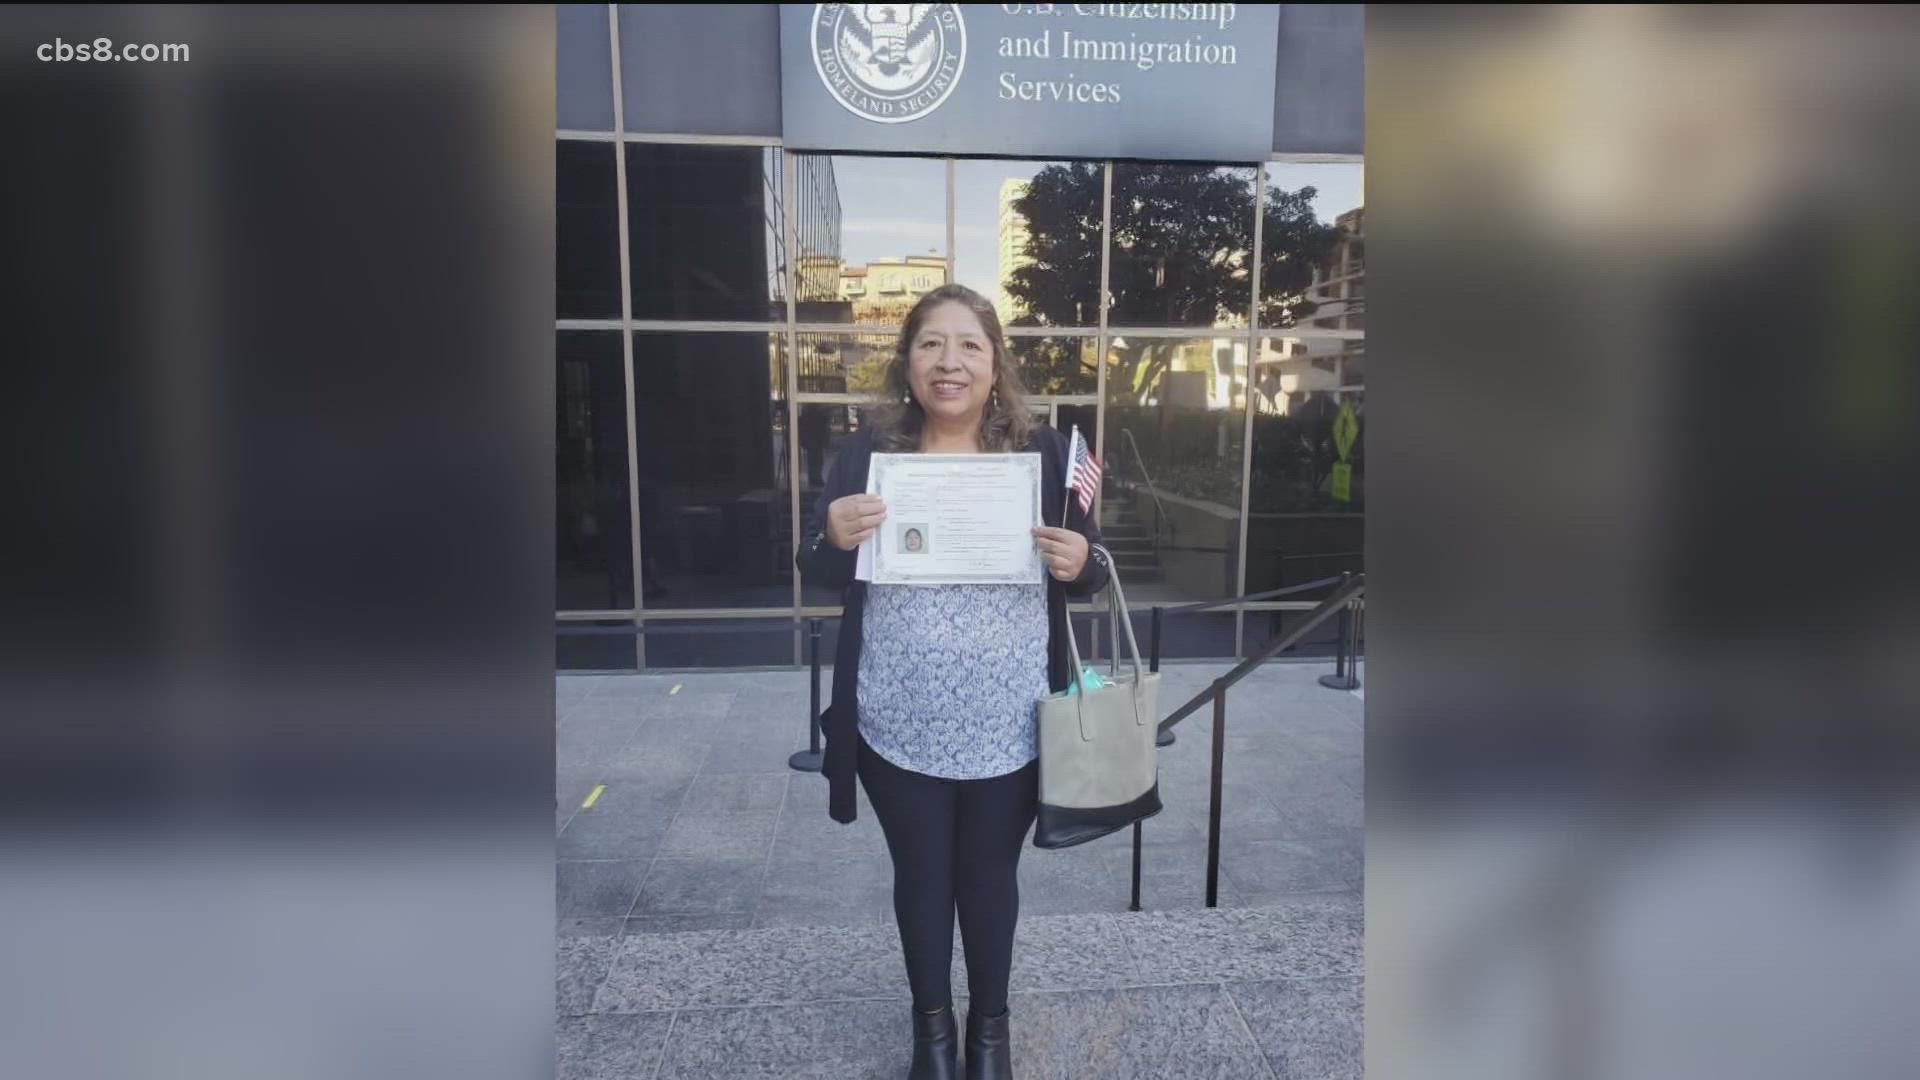 CBS 8 first told you about Guillermina and Pathways to Citizenship in October, as they worked together. Now, Guillermina is one of the newest American citizens.